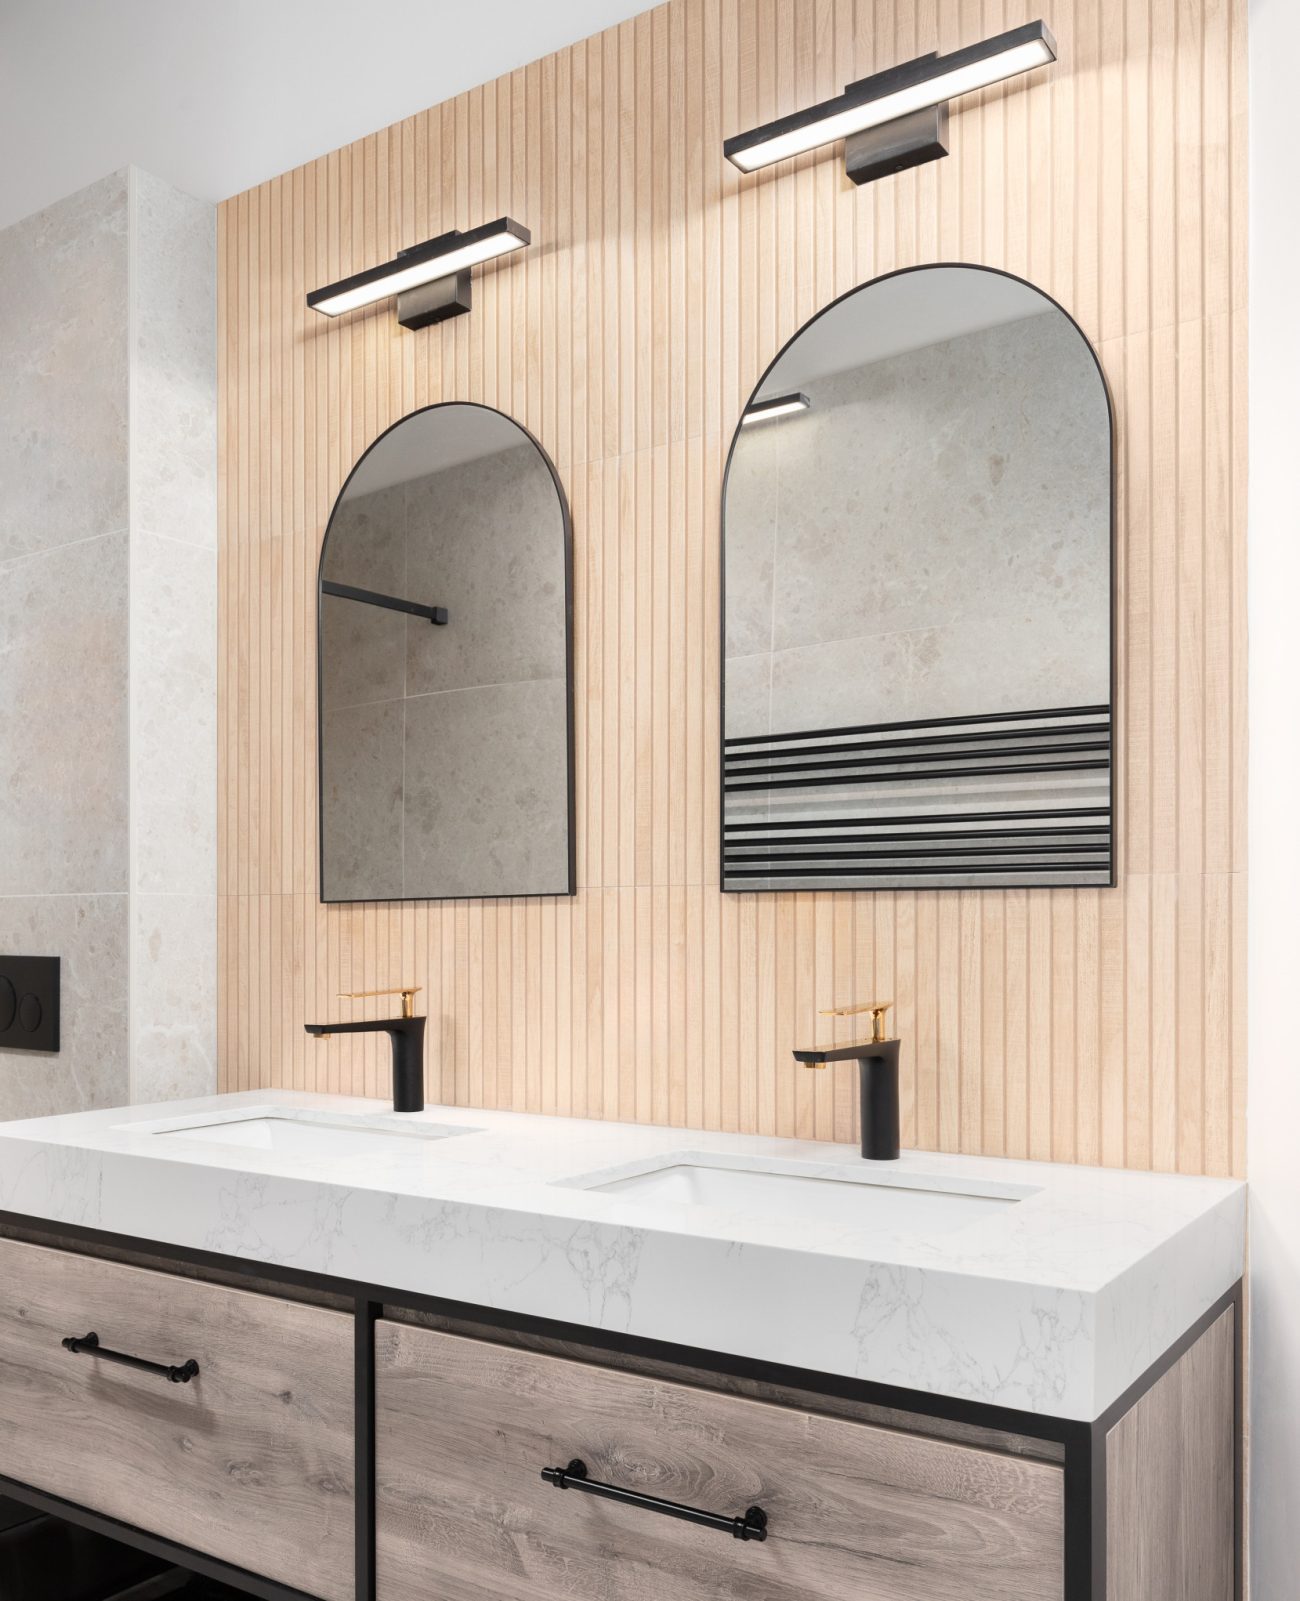 Modern bathroom with double vanity, white oak wood slat paneling on the wall and black arched mirrors